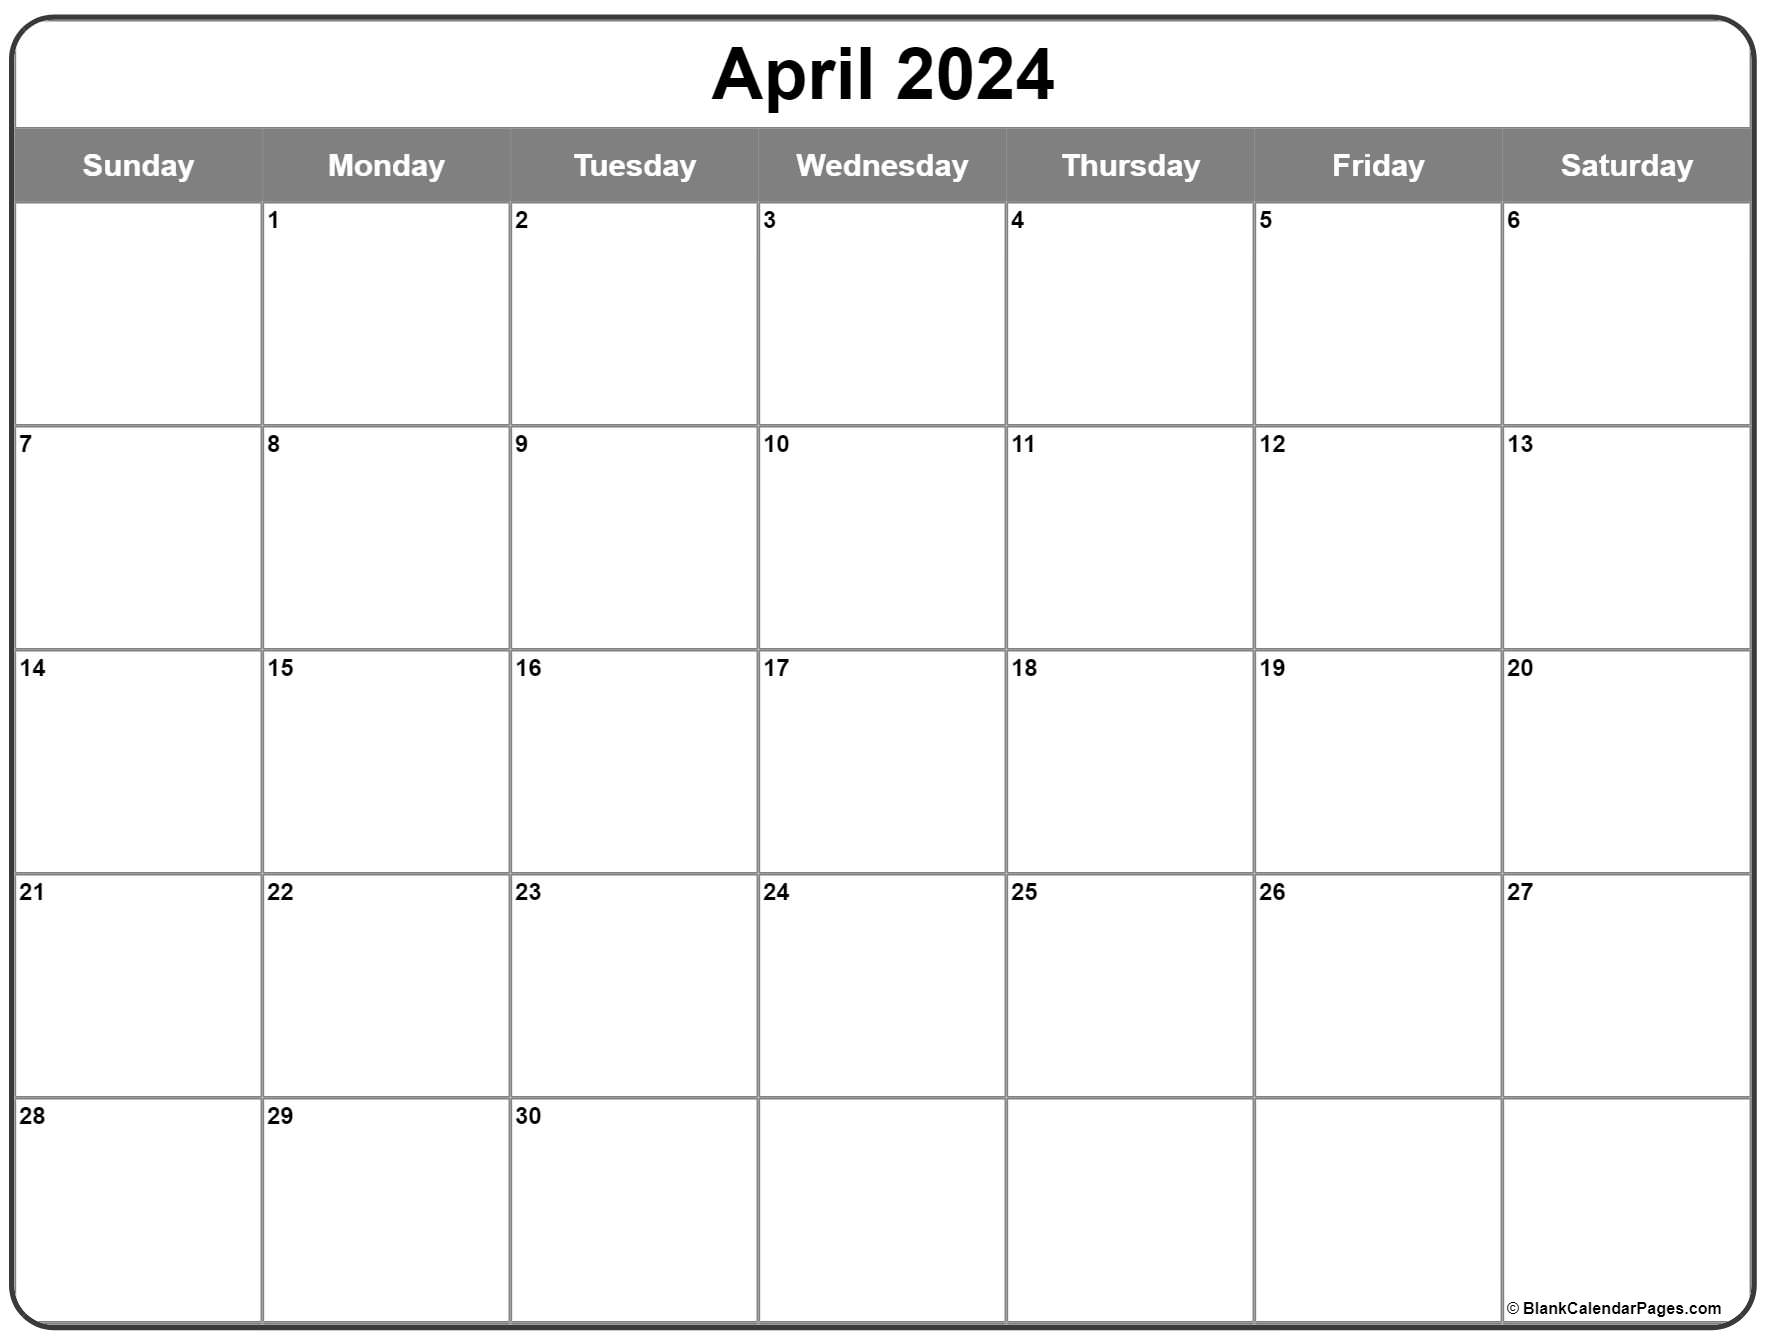 april-2023-calendar-printable-free-get-your-hands-on-amazing-free